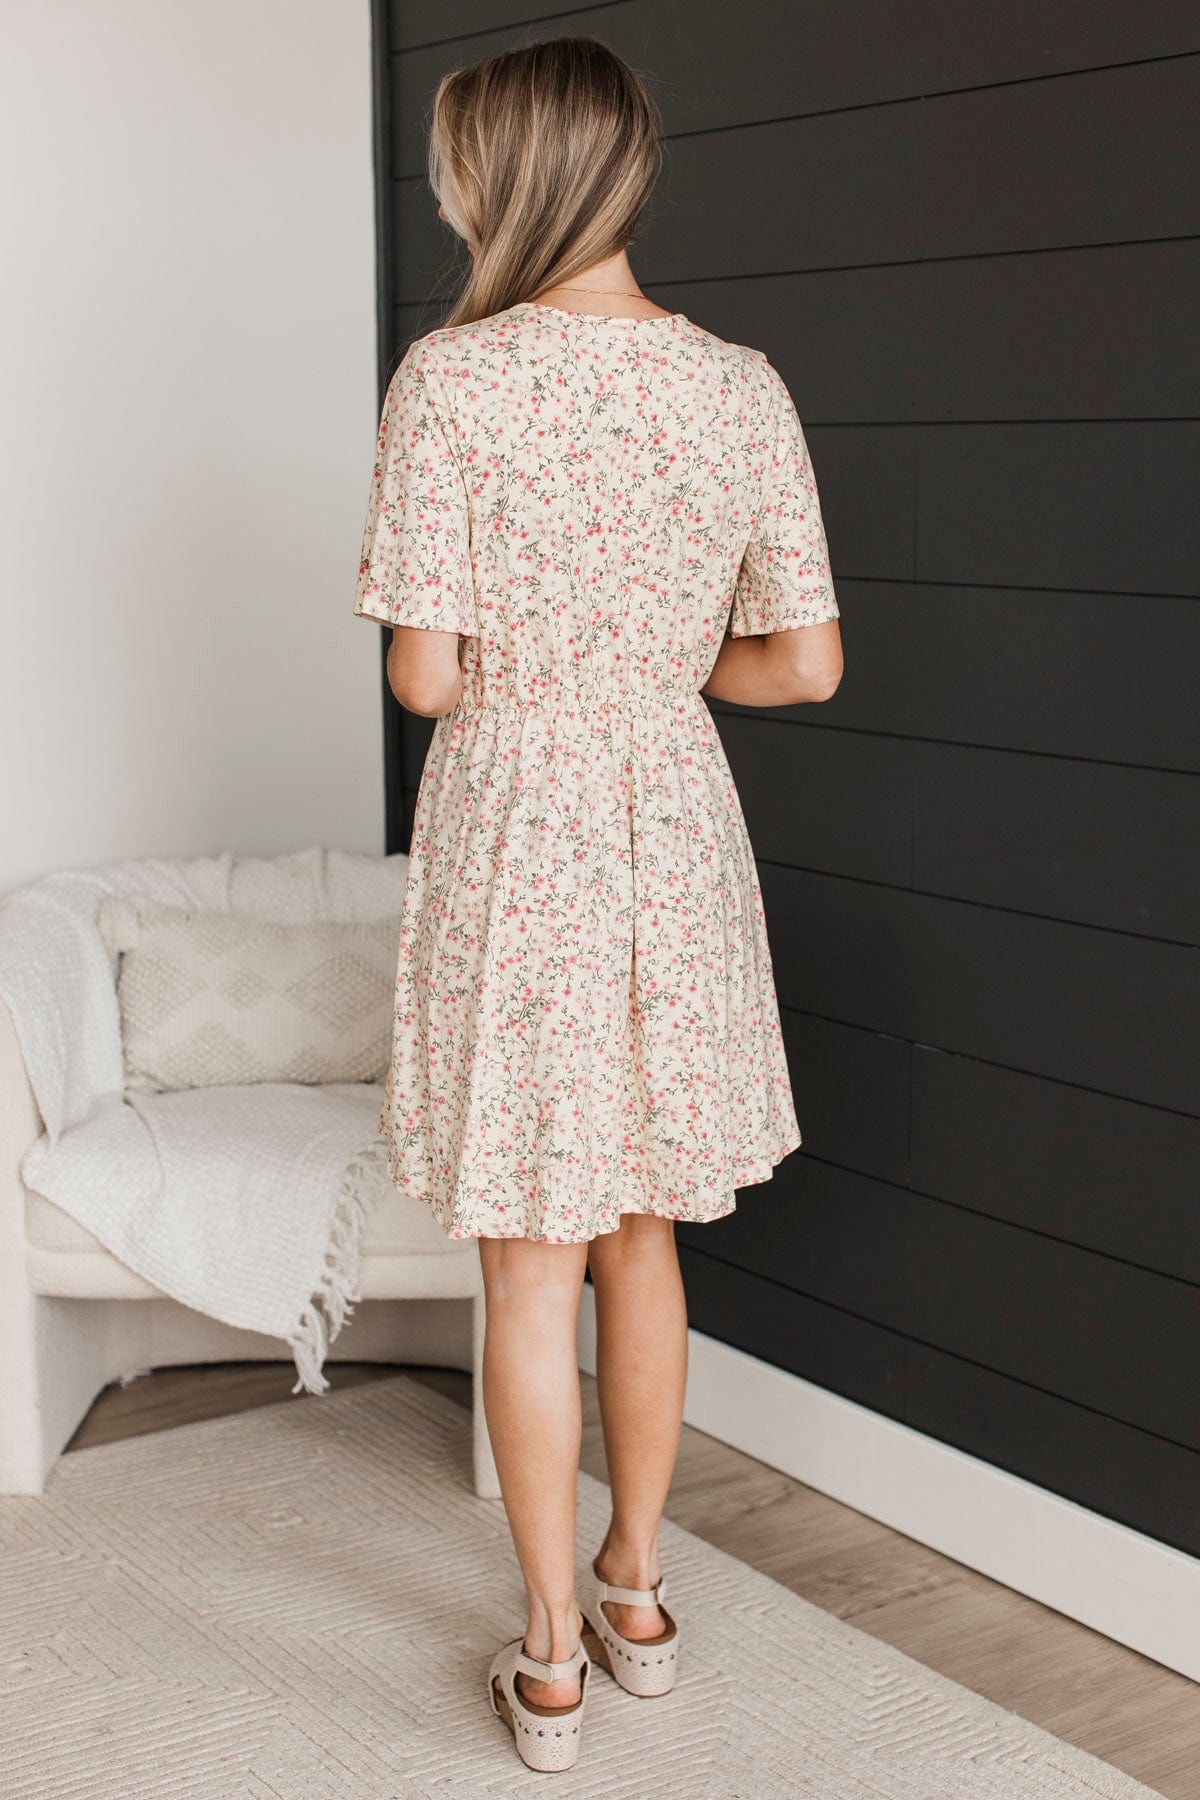 Our Time Together Floral Dress- Light Yellow